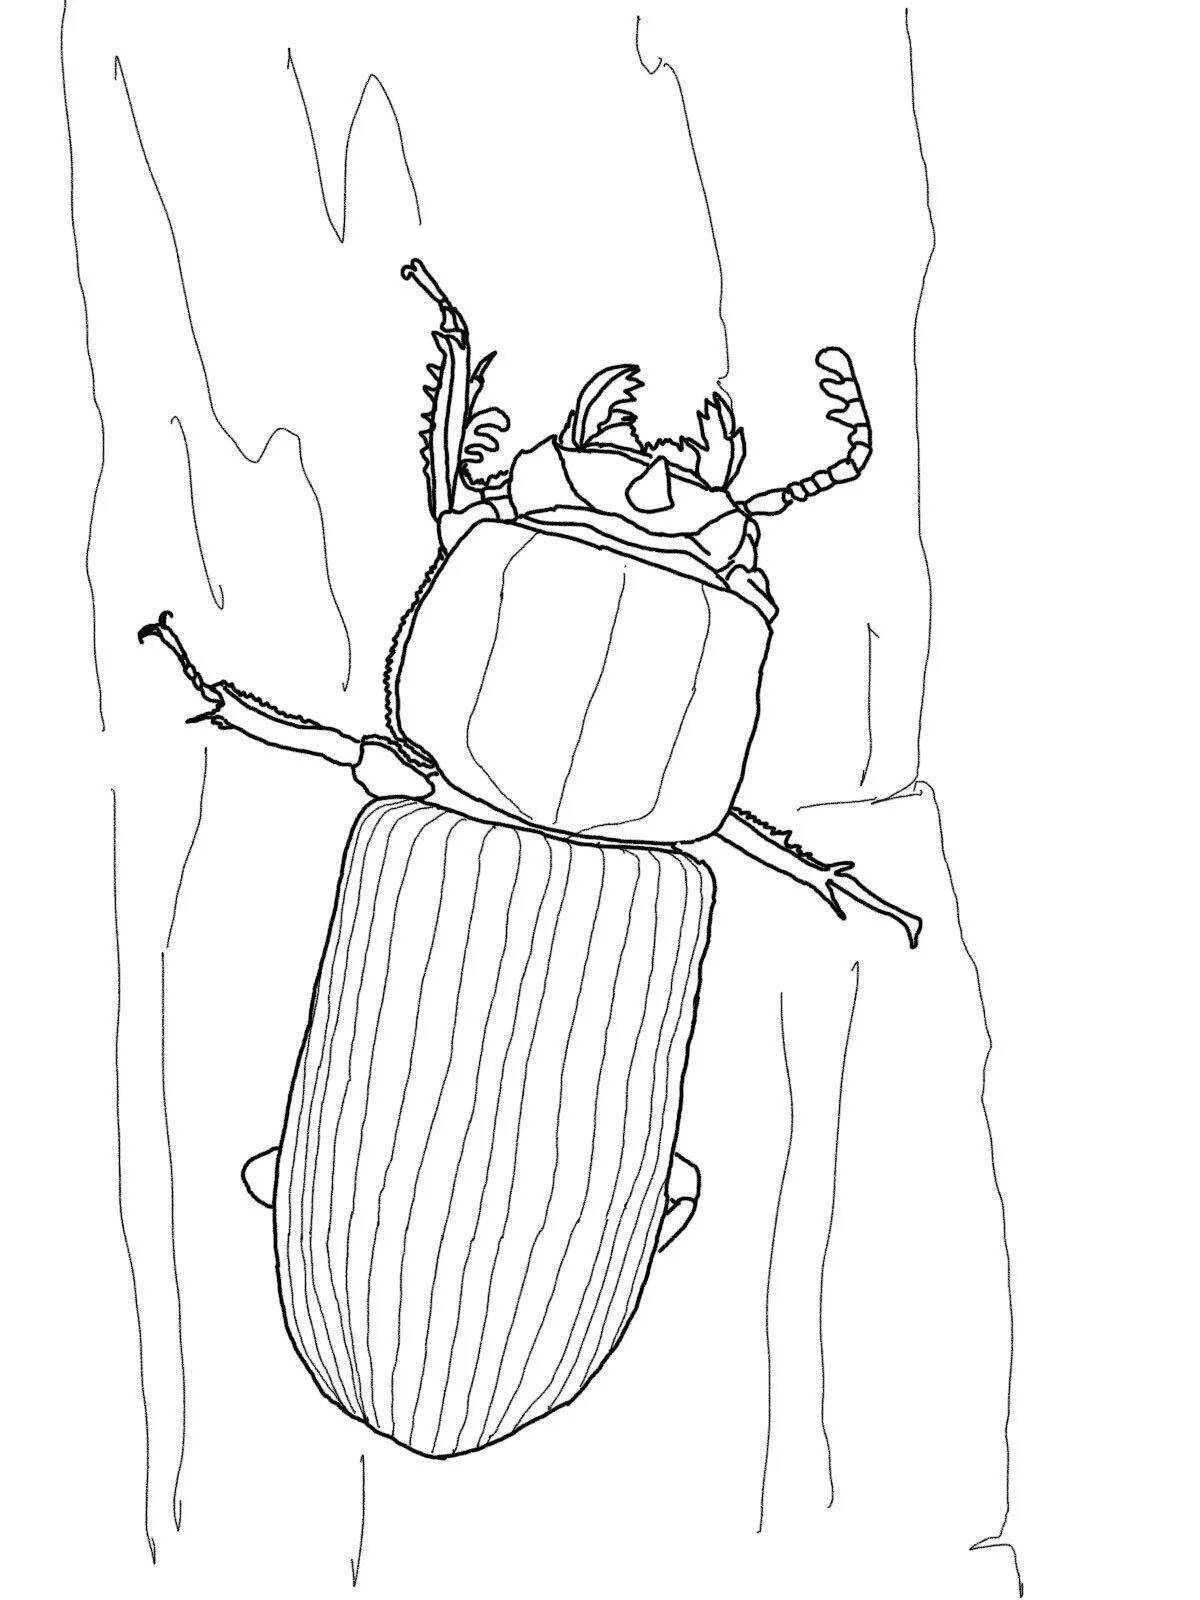 Charming beetle coloring book